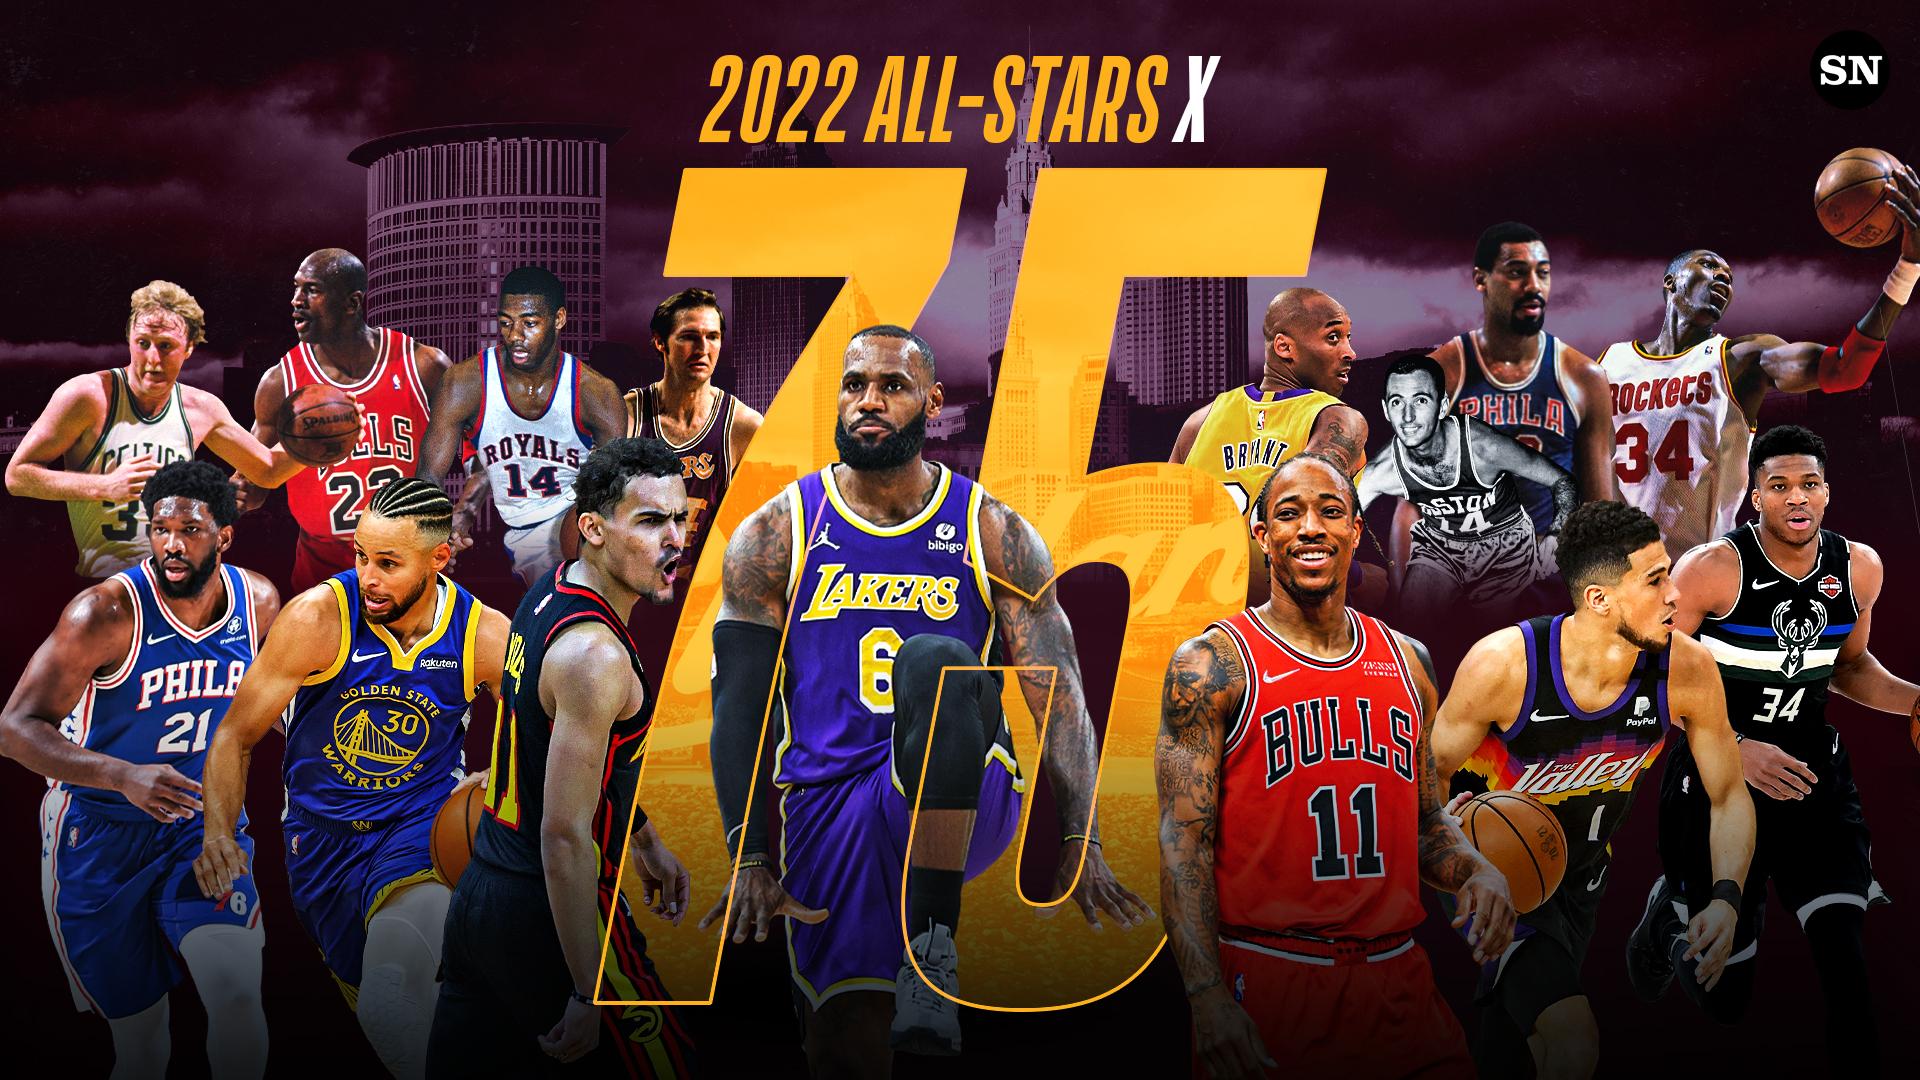 Comparing Every 2022 NBA All Star To Members Of 75th Anniversary Team